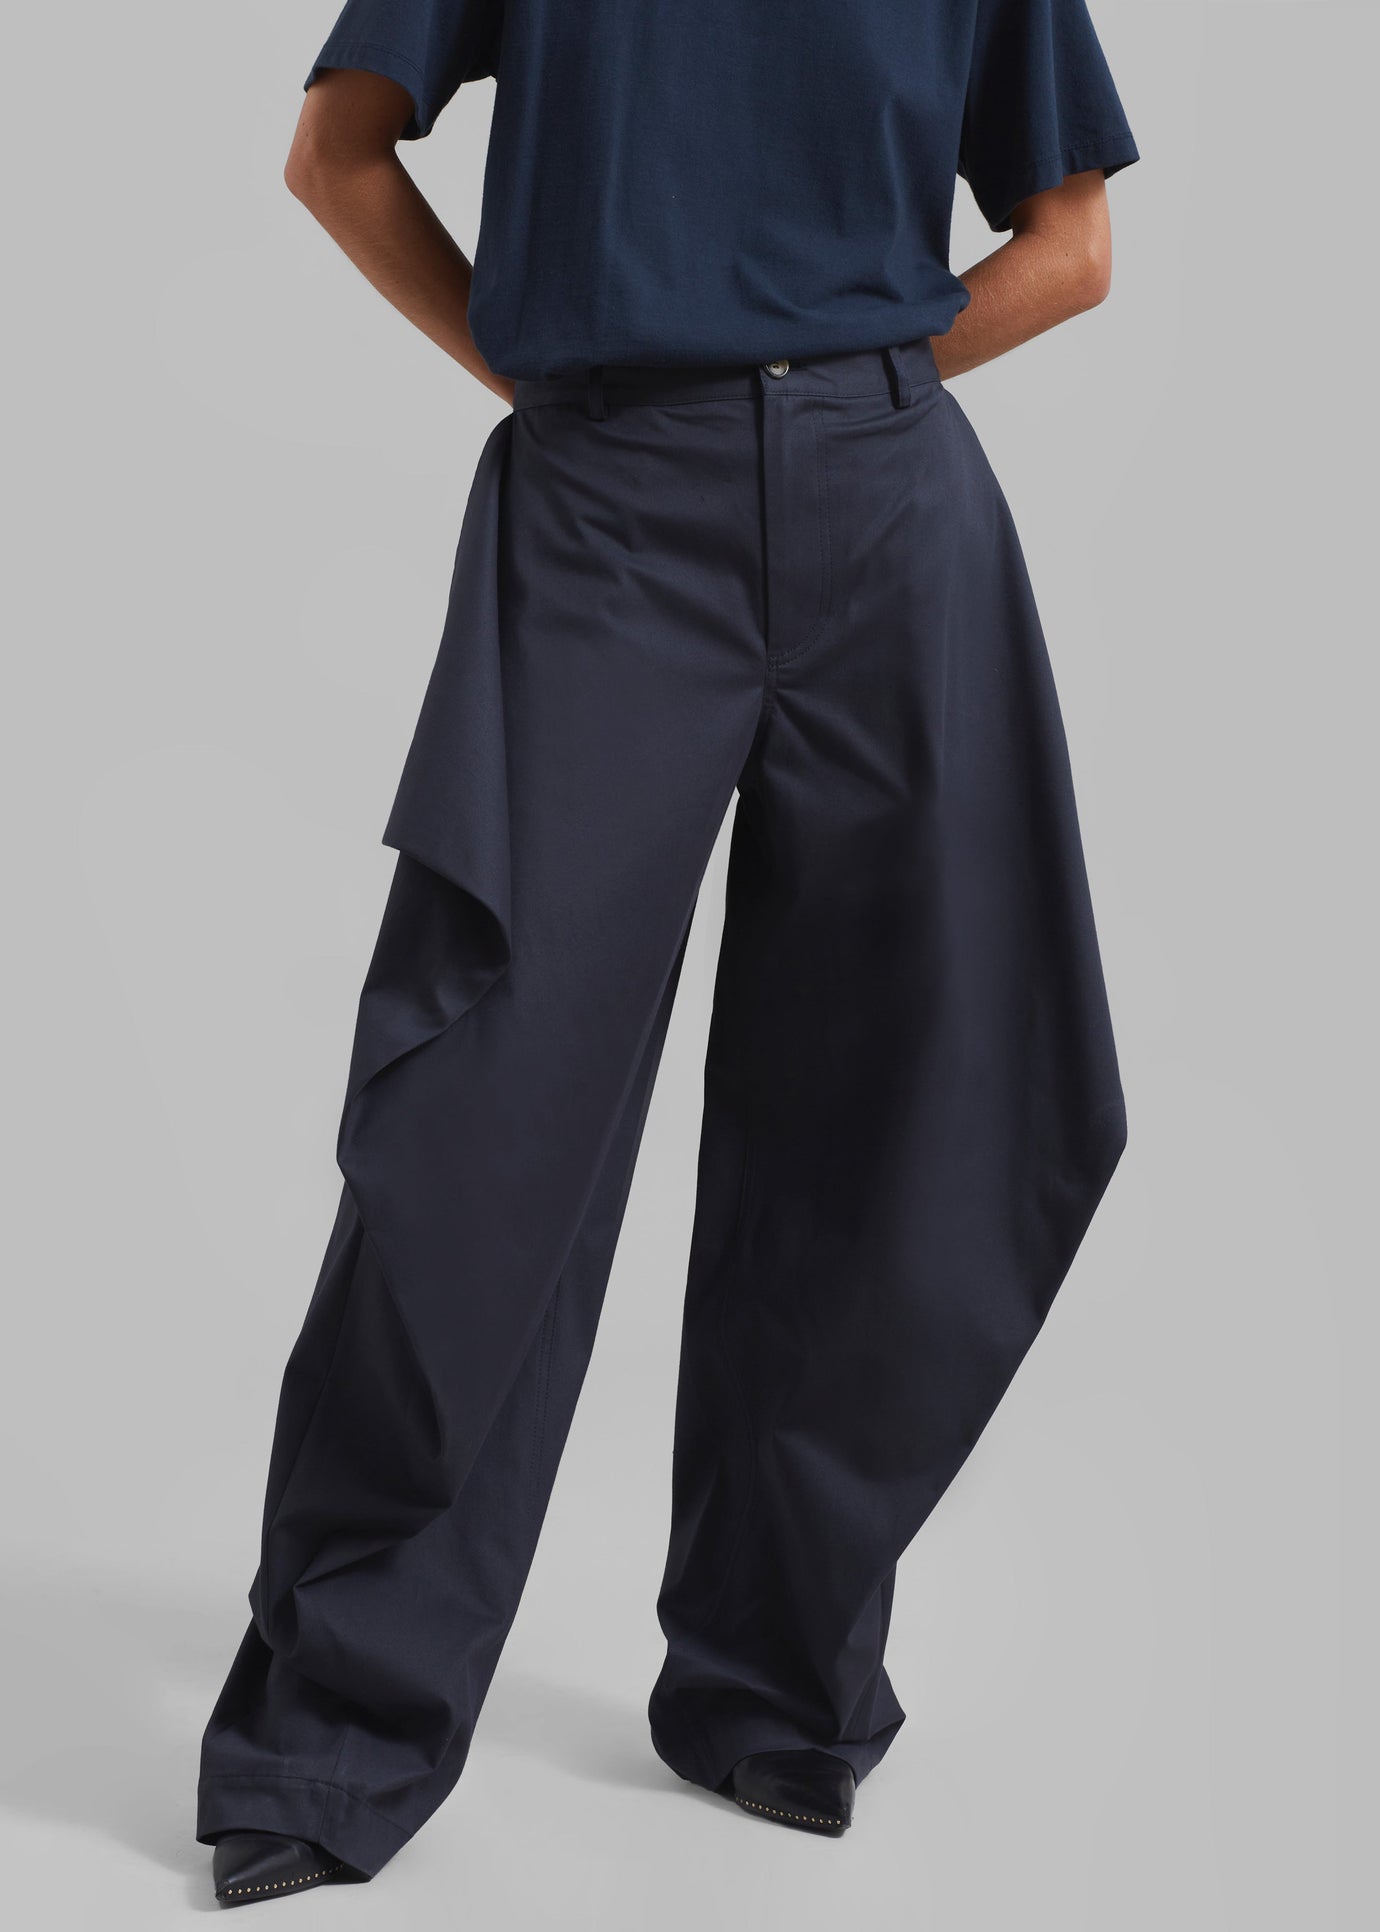 JW Anderson Kite Trousers - Navy - 1